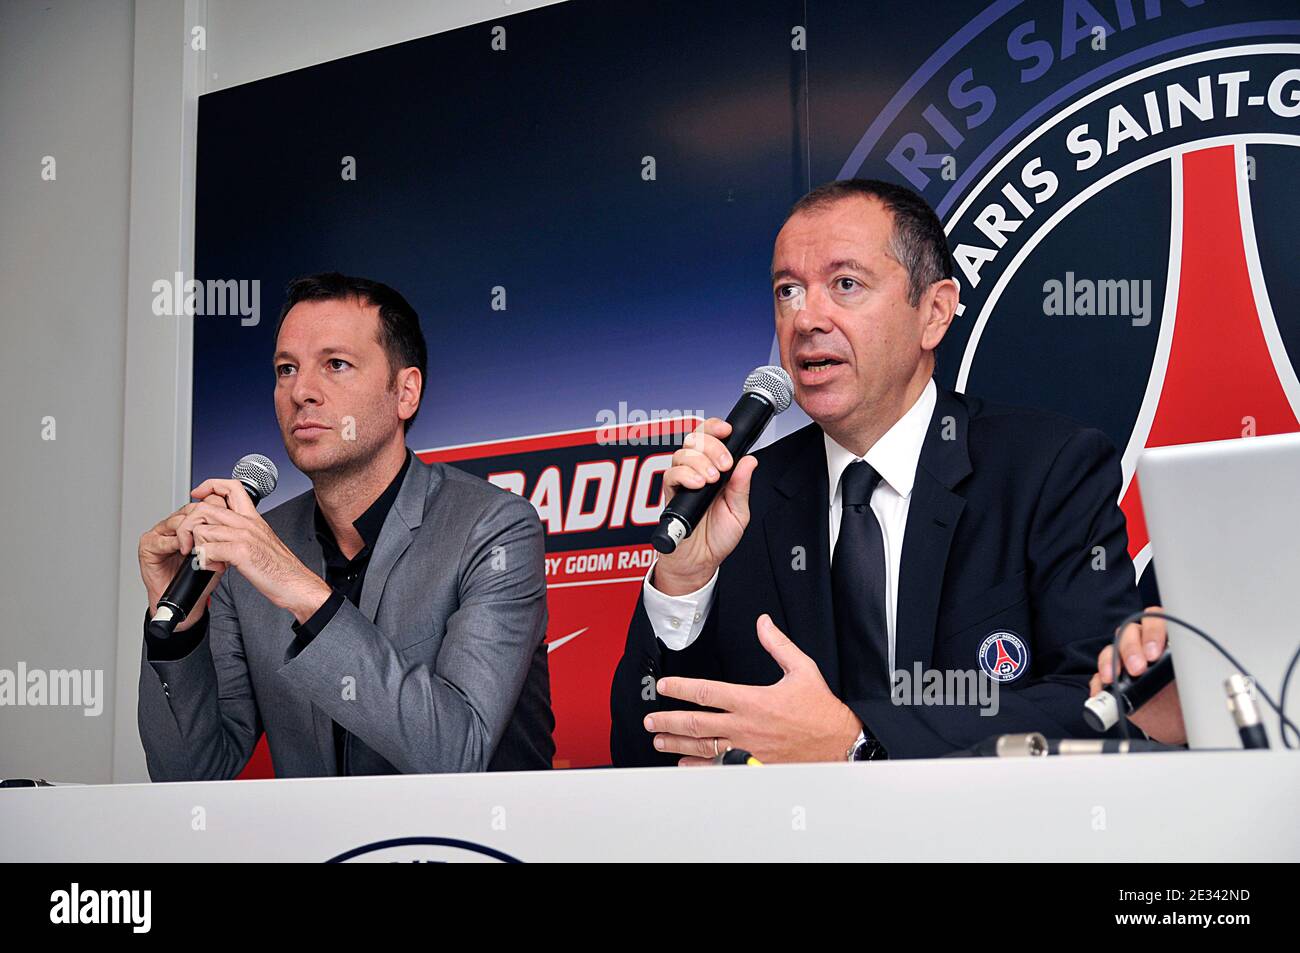 Paris Saint-Germain (PSG) football team president Robin Leproux and Goom Radio chairman Roberto Ciurleo attend the launch of PSG radio to 'le Camp des Loges' in Saint-Germain-en-Laye near Paris, France on Wednesday September 22, 2010. Photo by Thierry Plessis/ABACAPRESS.COM Stock Photo